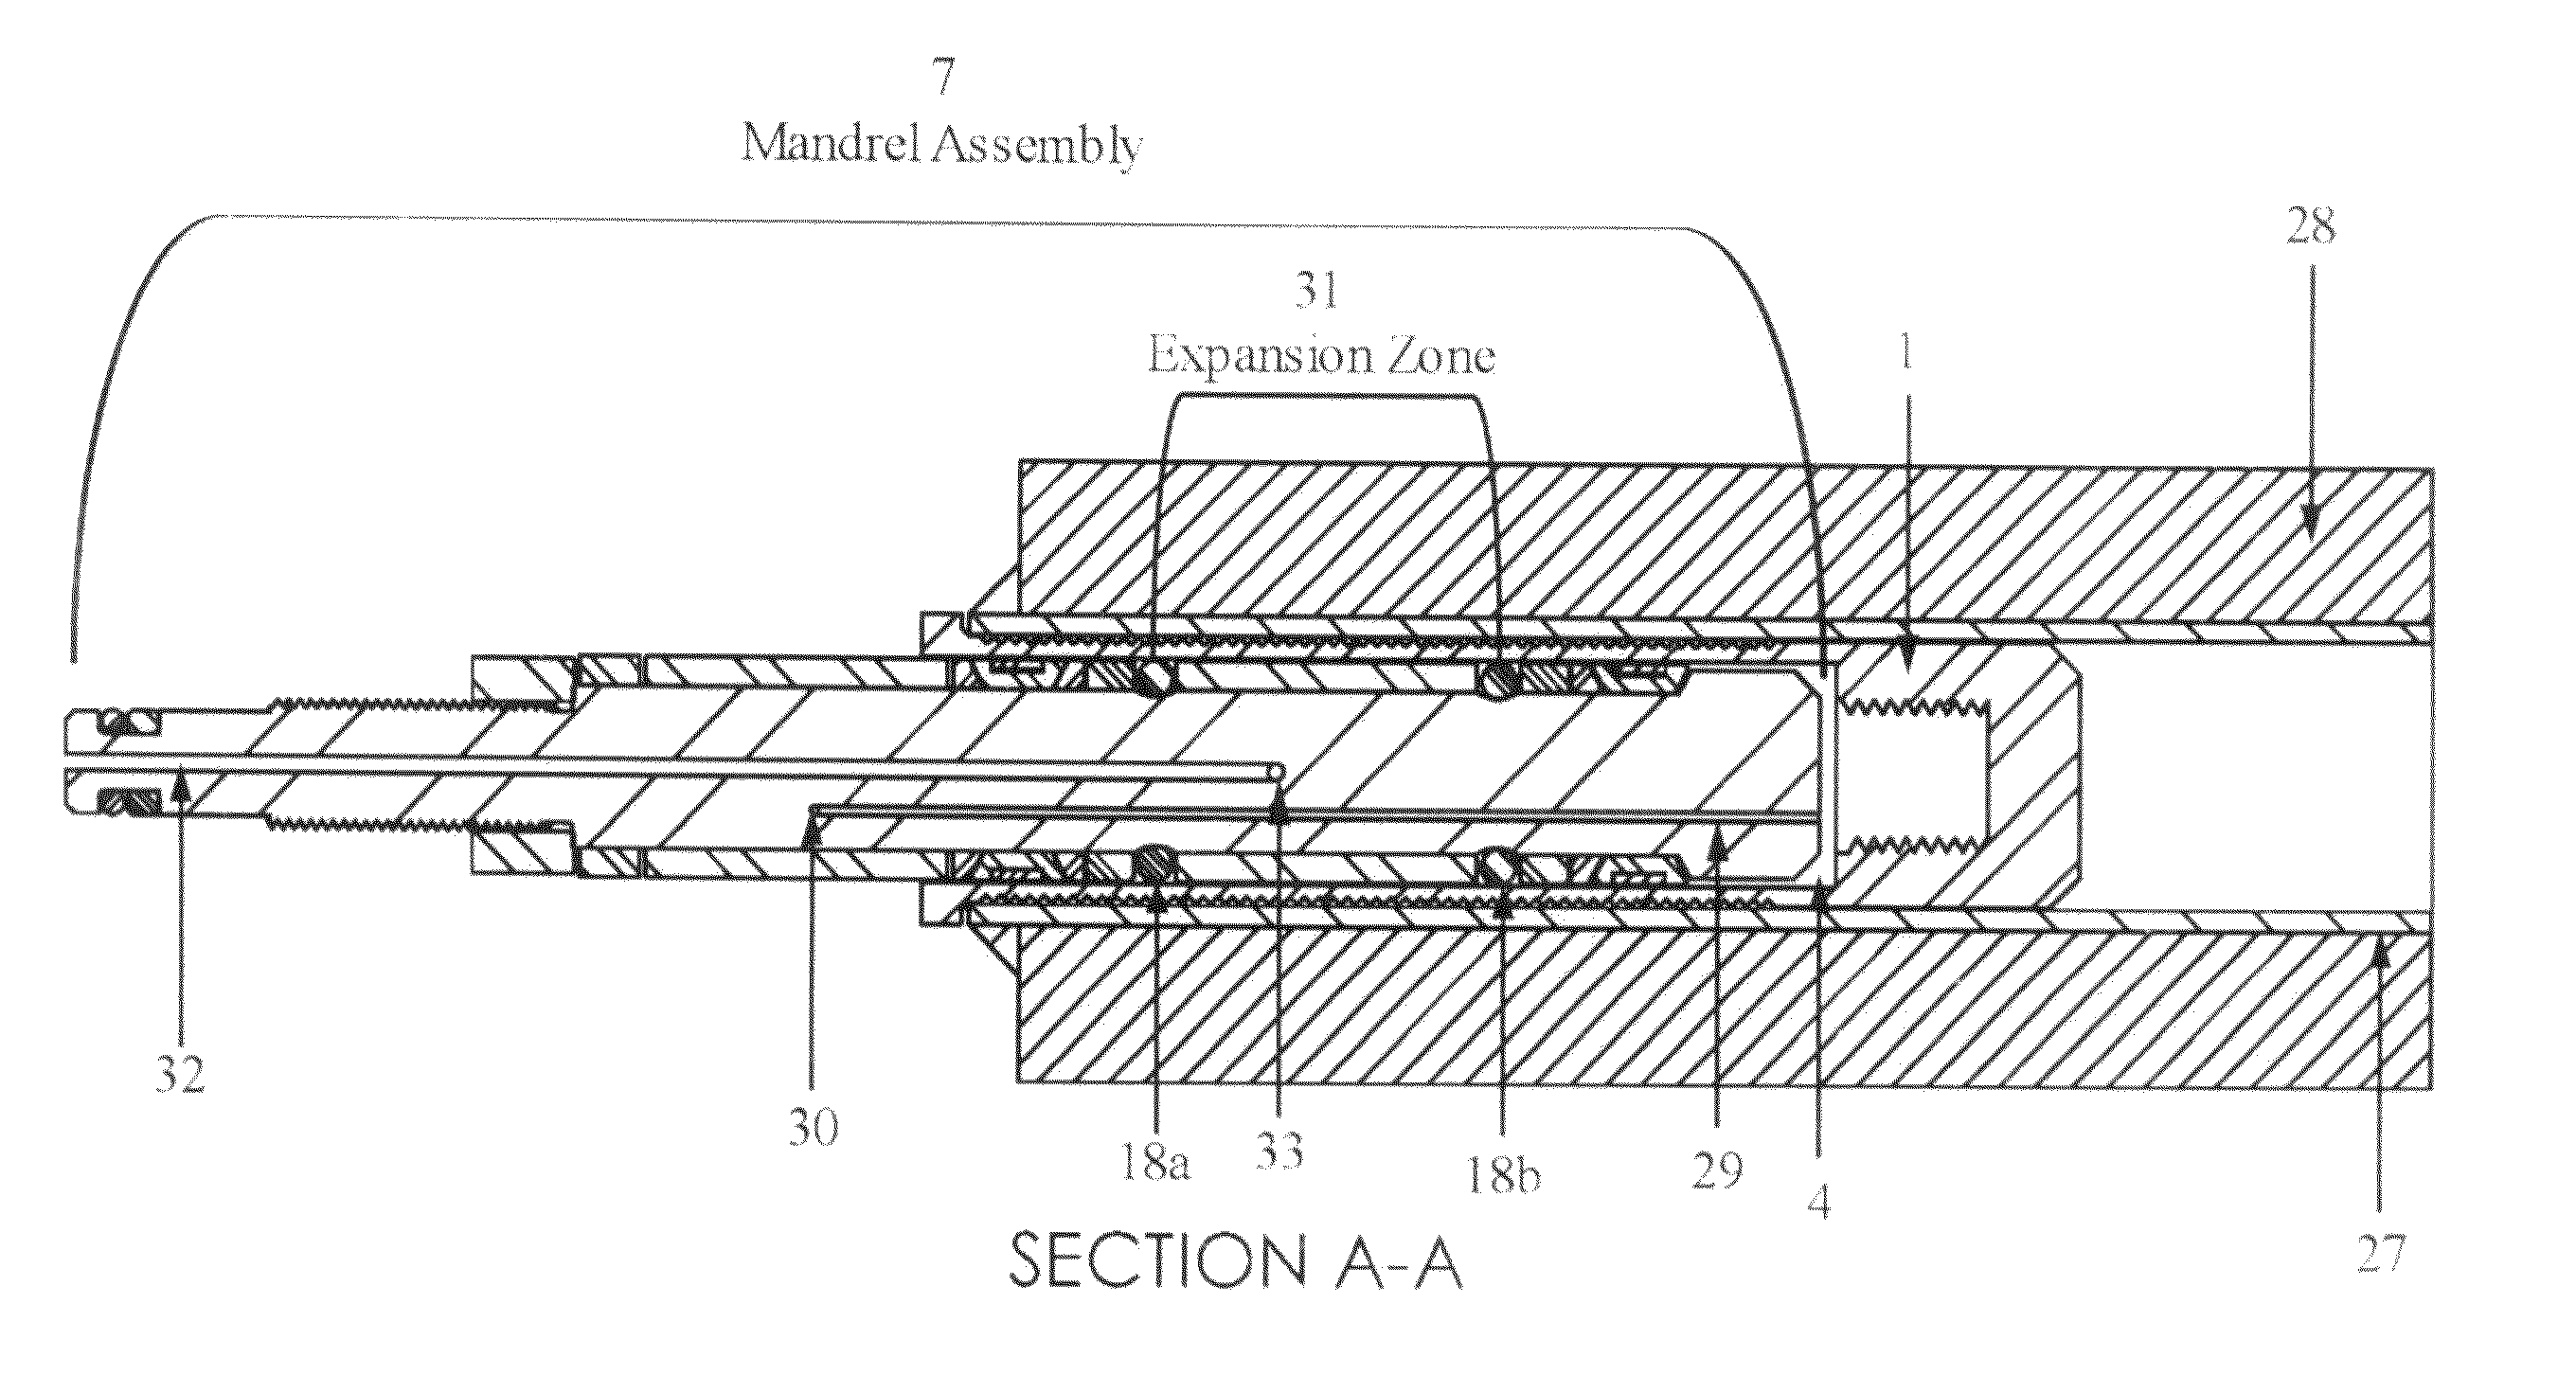 Hydraulically installed tube plug, tube plug installation tooling, and installation system and method